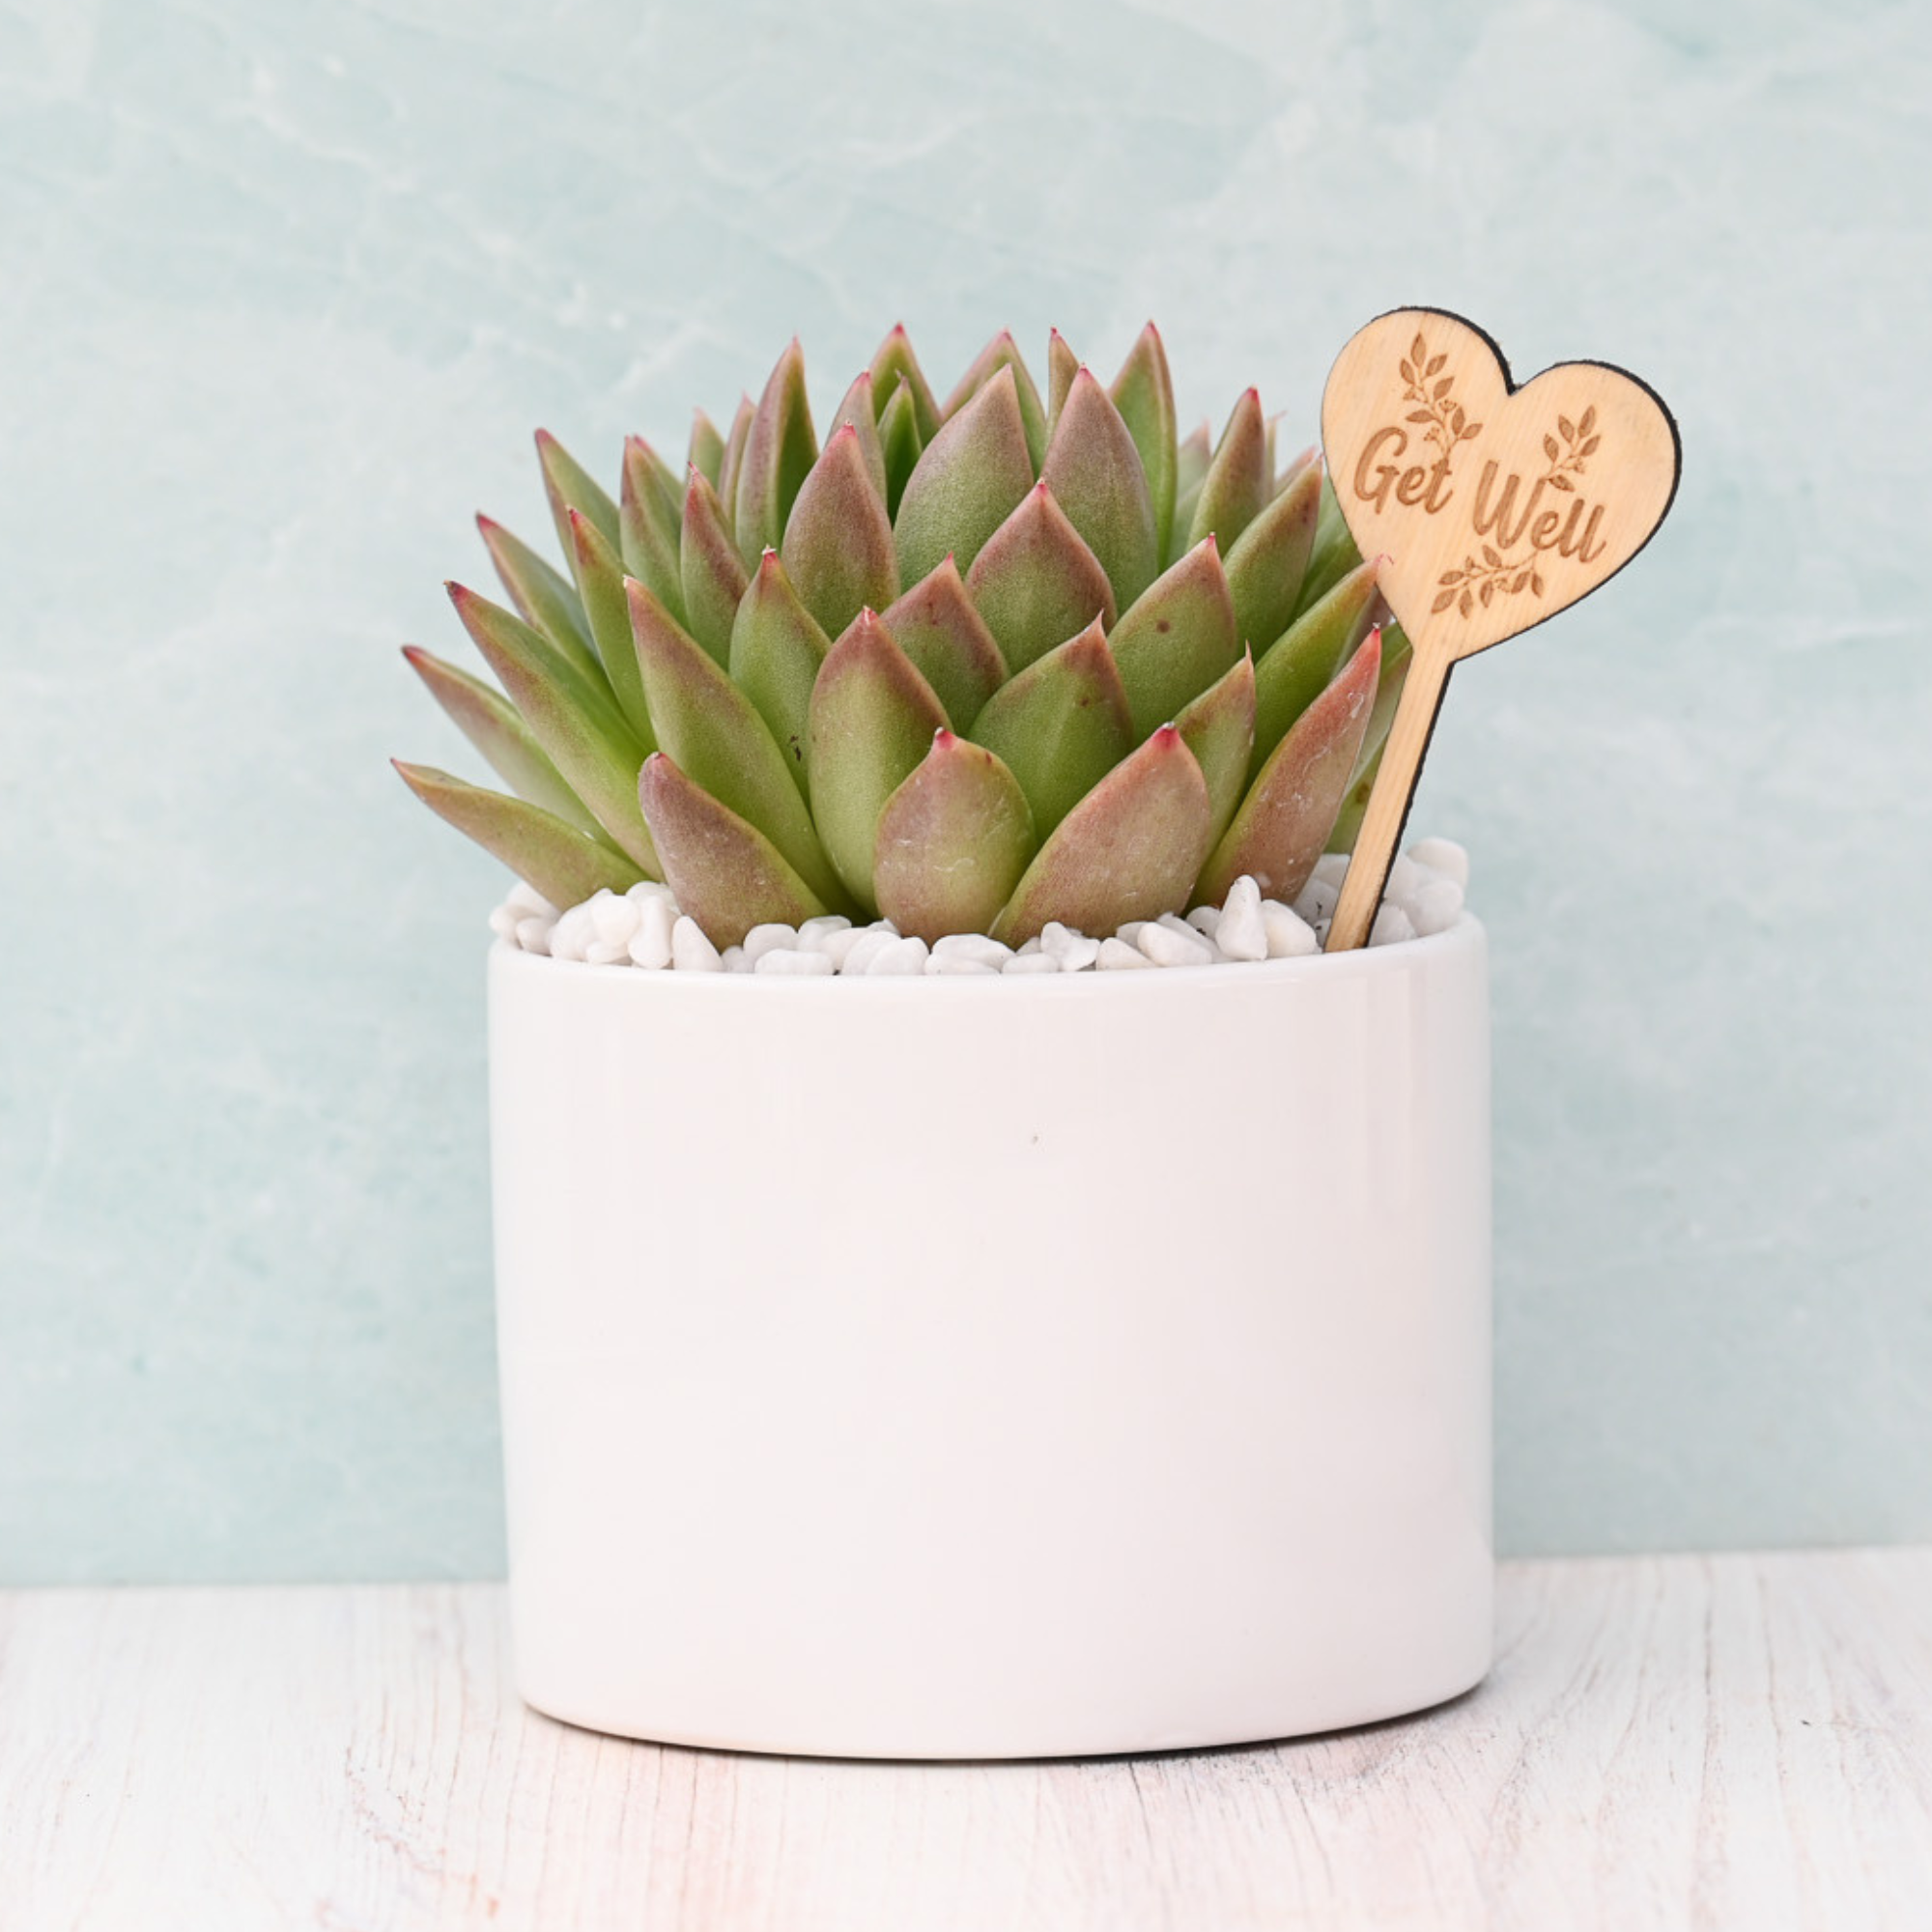 Get Well Soon Succulent Gift